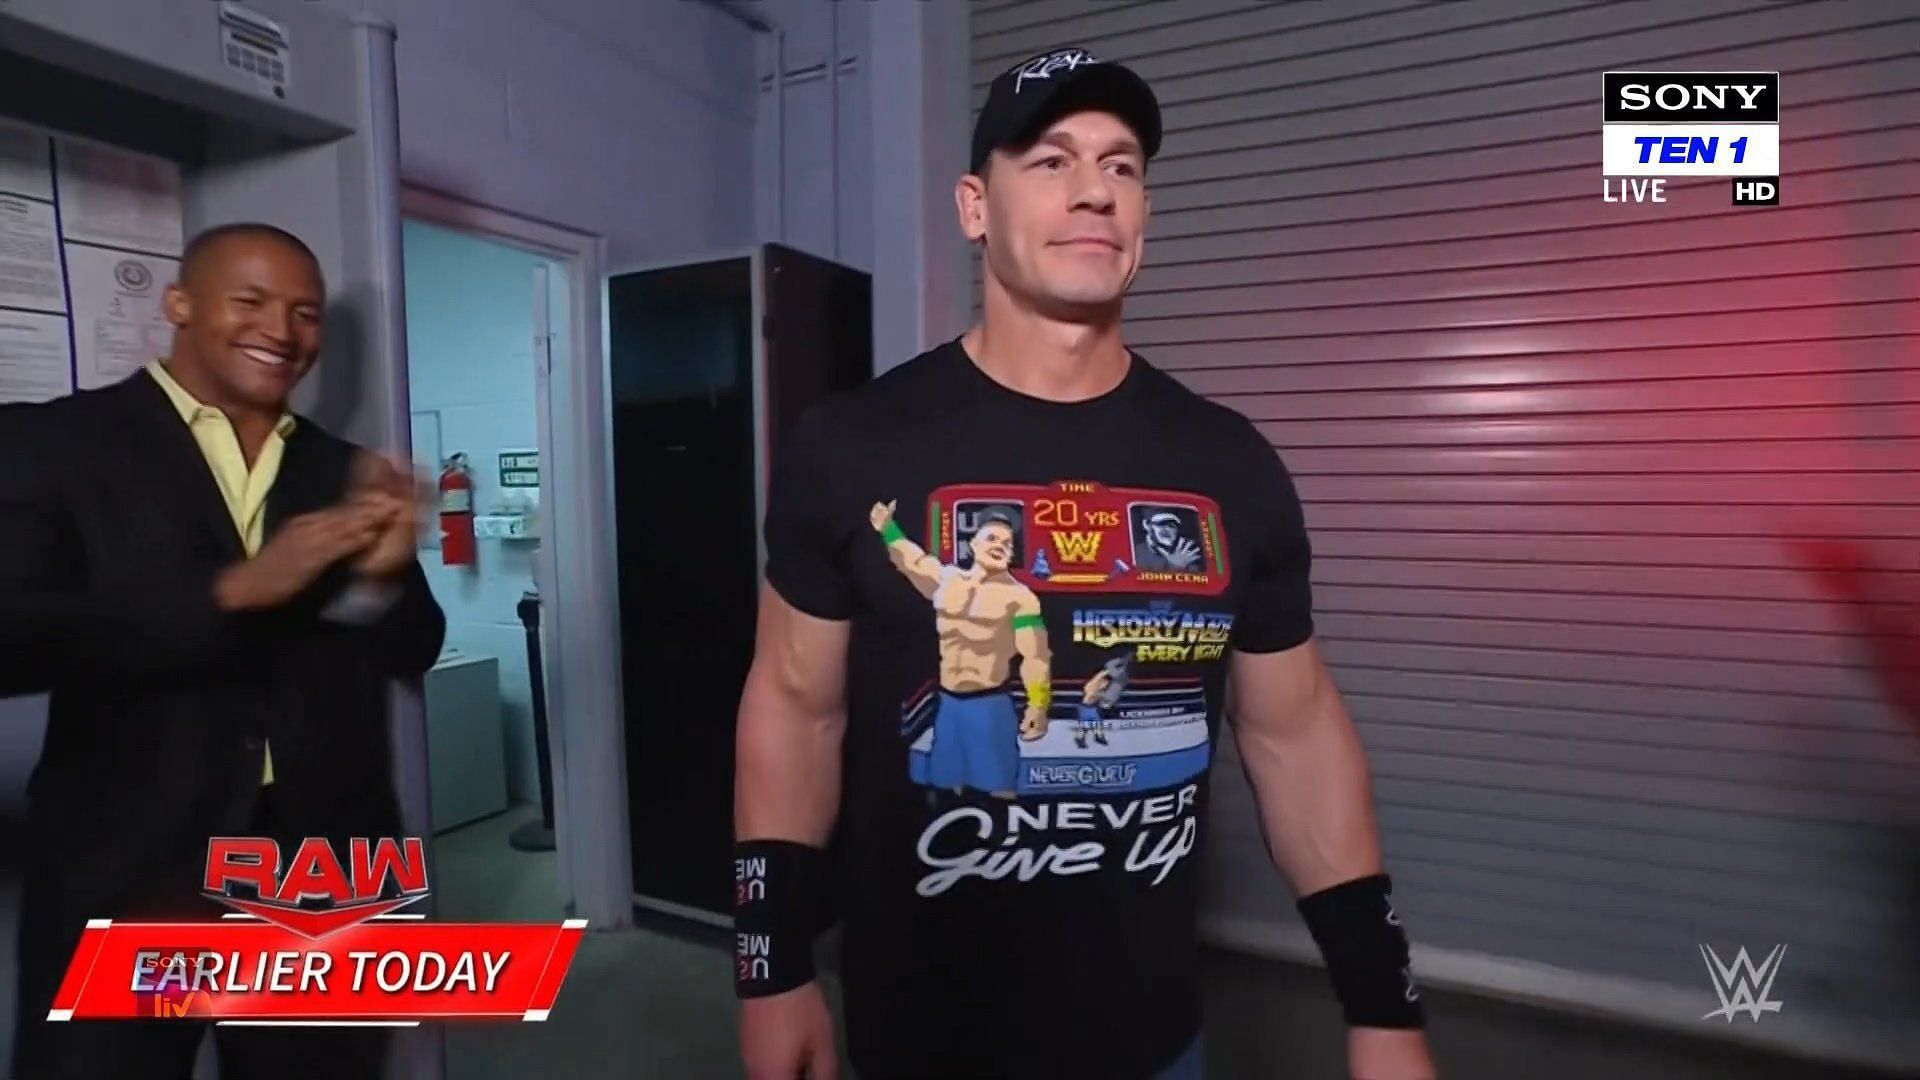 John Cena received the praise of several legends for this 20th anniversary